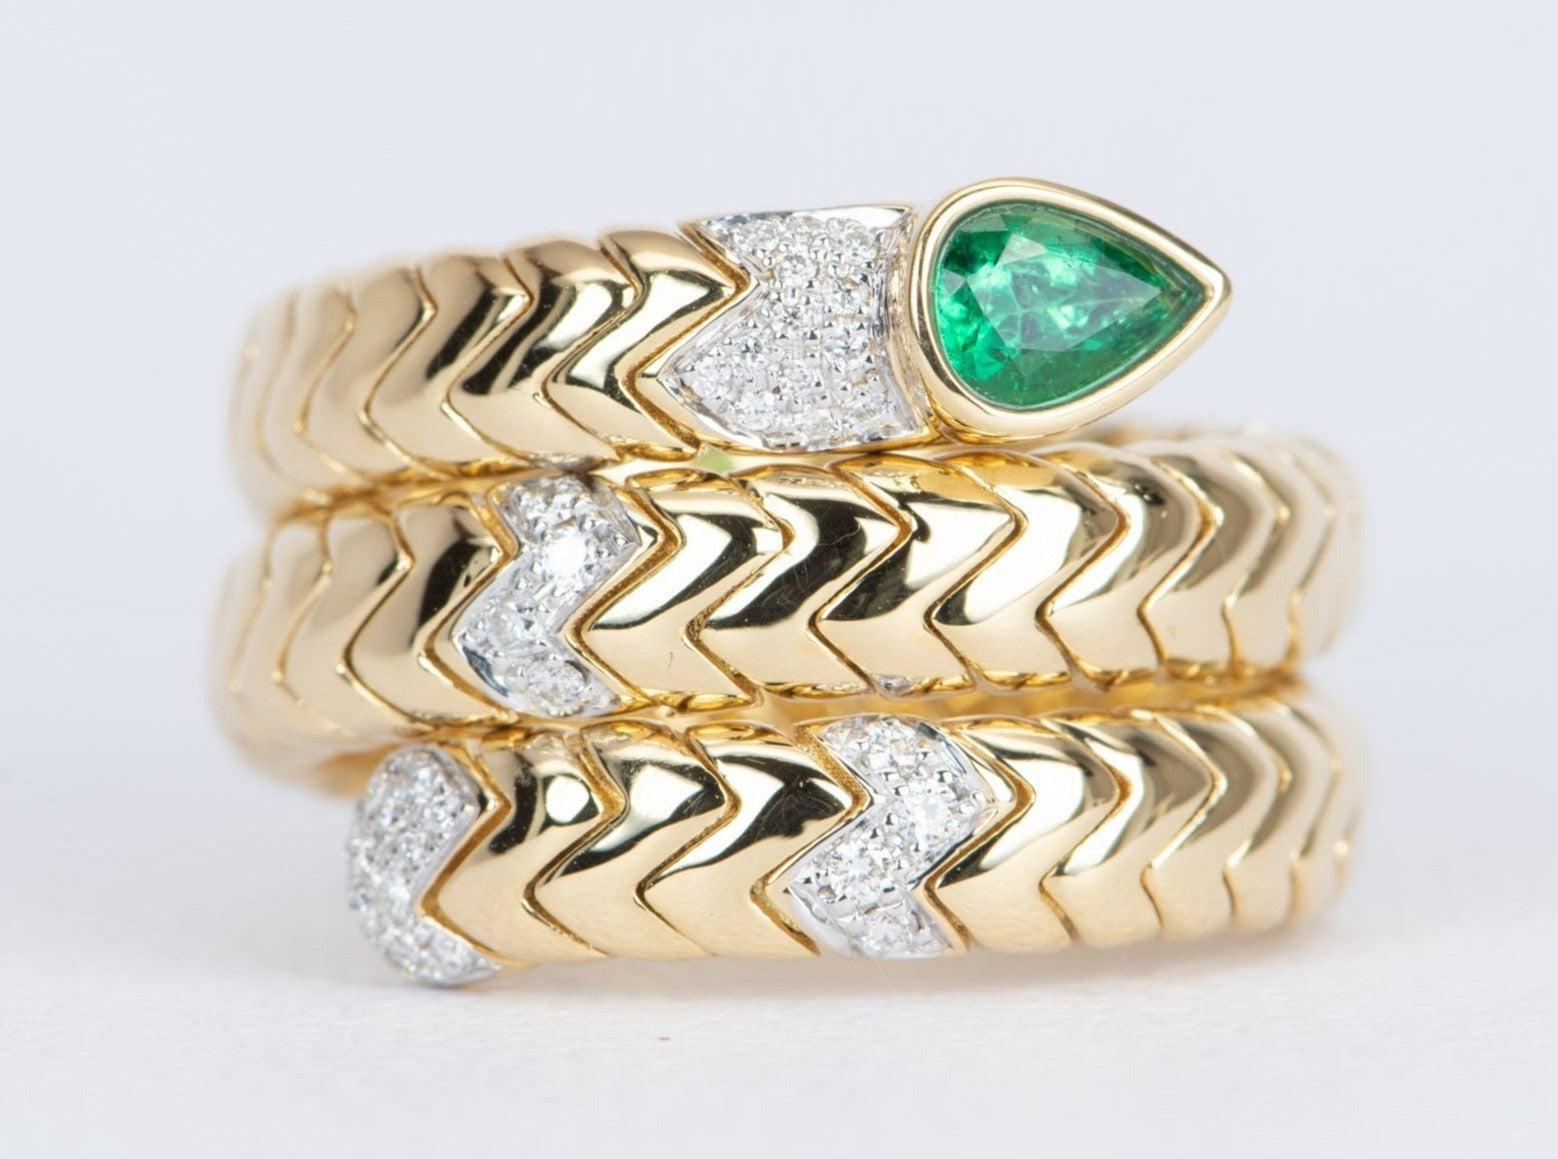 ♥ Solid 18k yellow gold Tubogas snake coil ring with a emerald head and diamond accent
♥ Gorgeous green color!
♥ The item measures 14.6 mm in length, 17.7 mm in width, and stands 2.5 mm from the finger

♥ US Size 8 ( this ring is not resizable)
♥